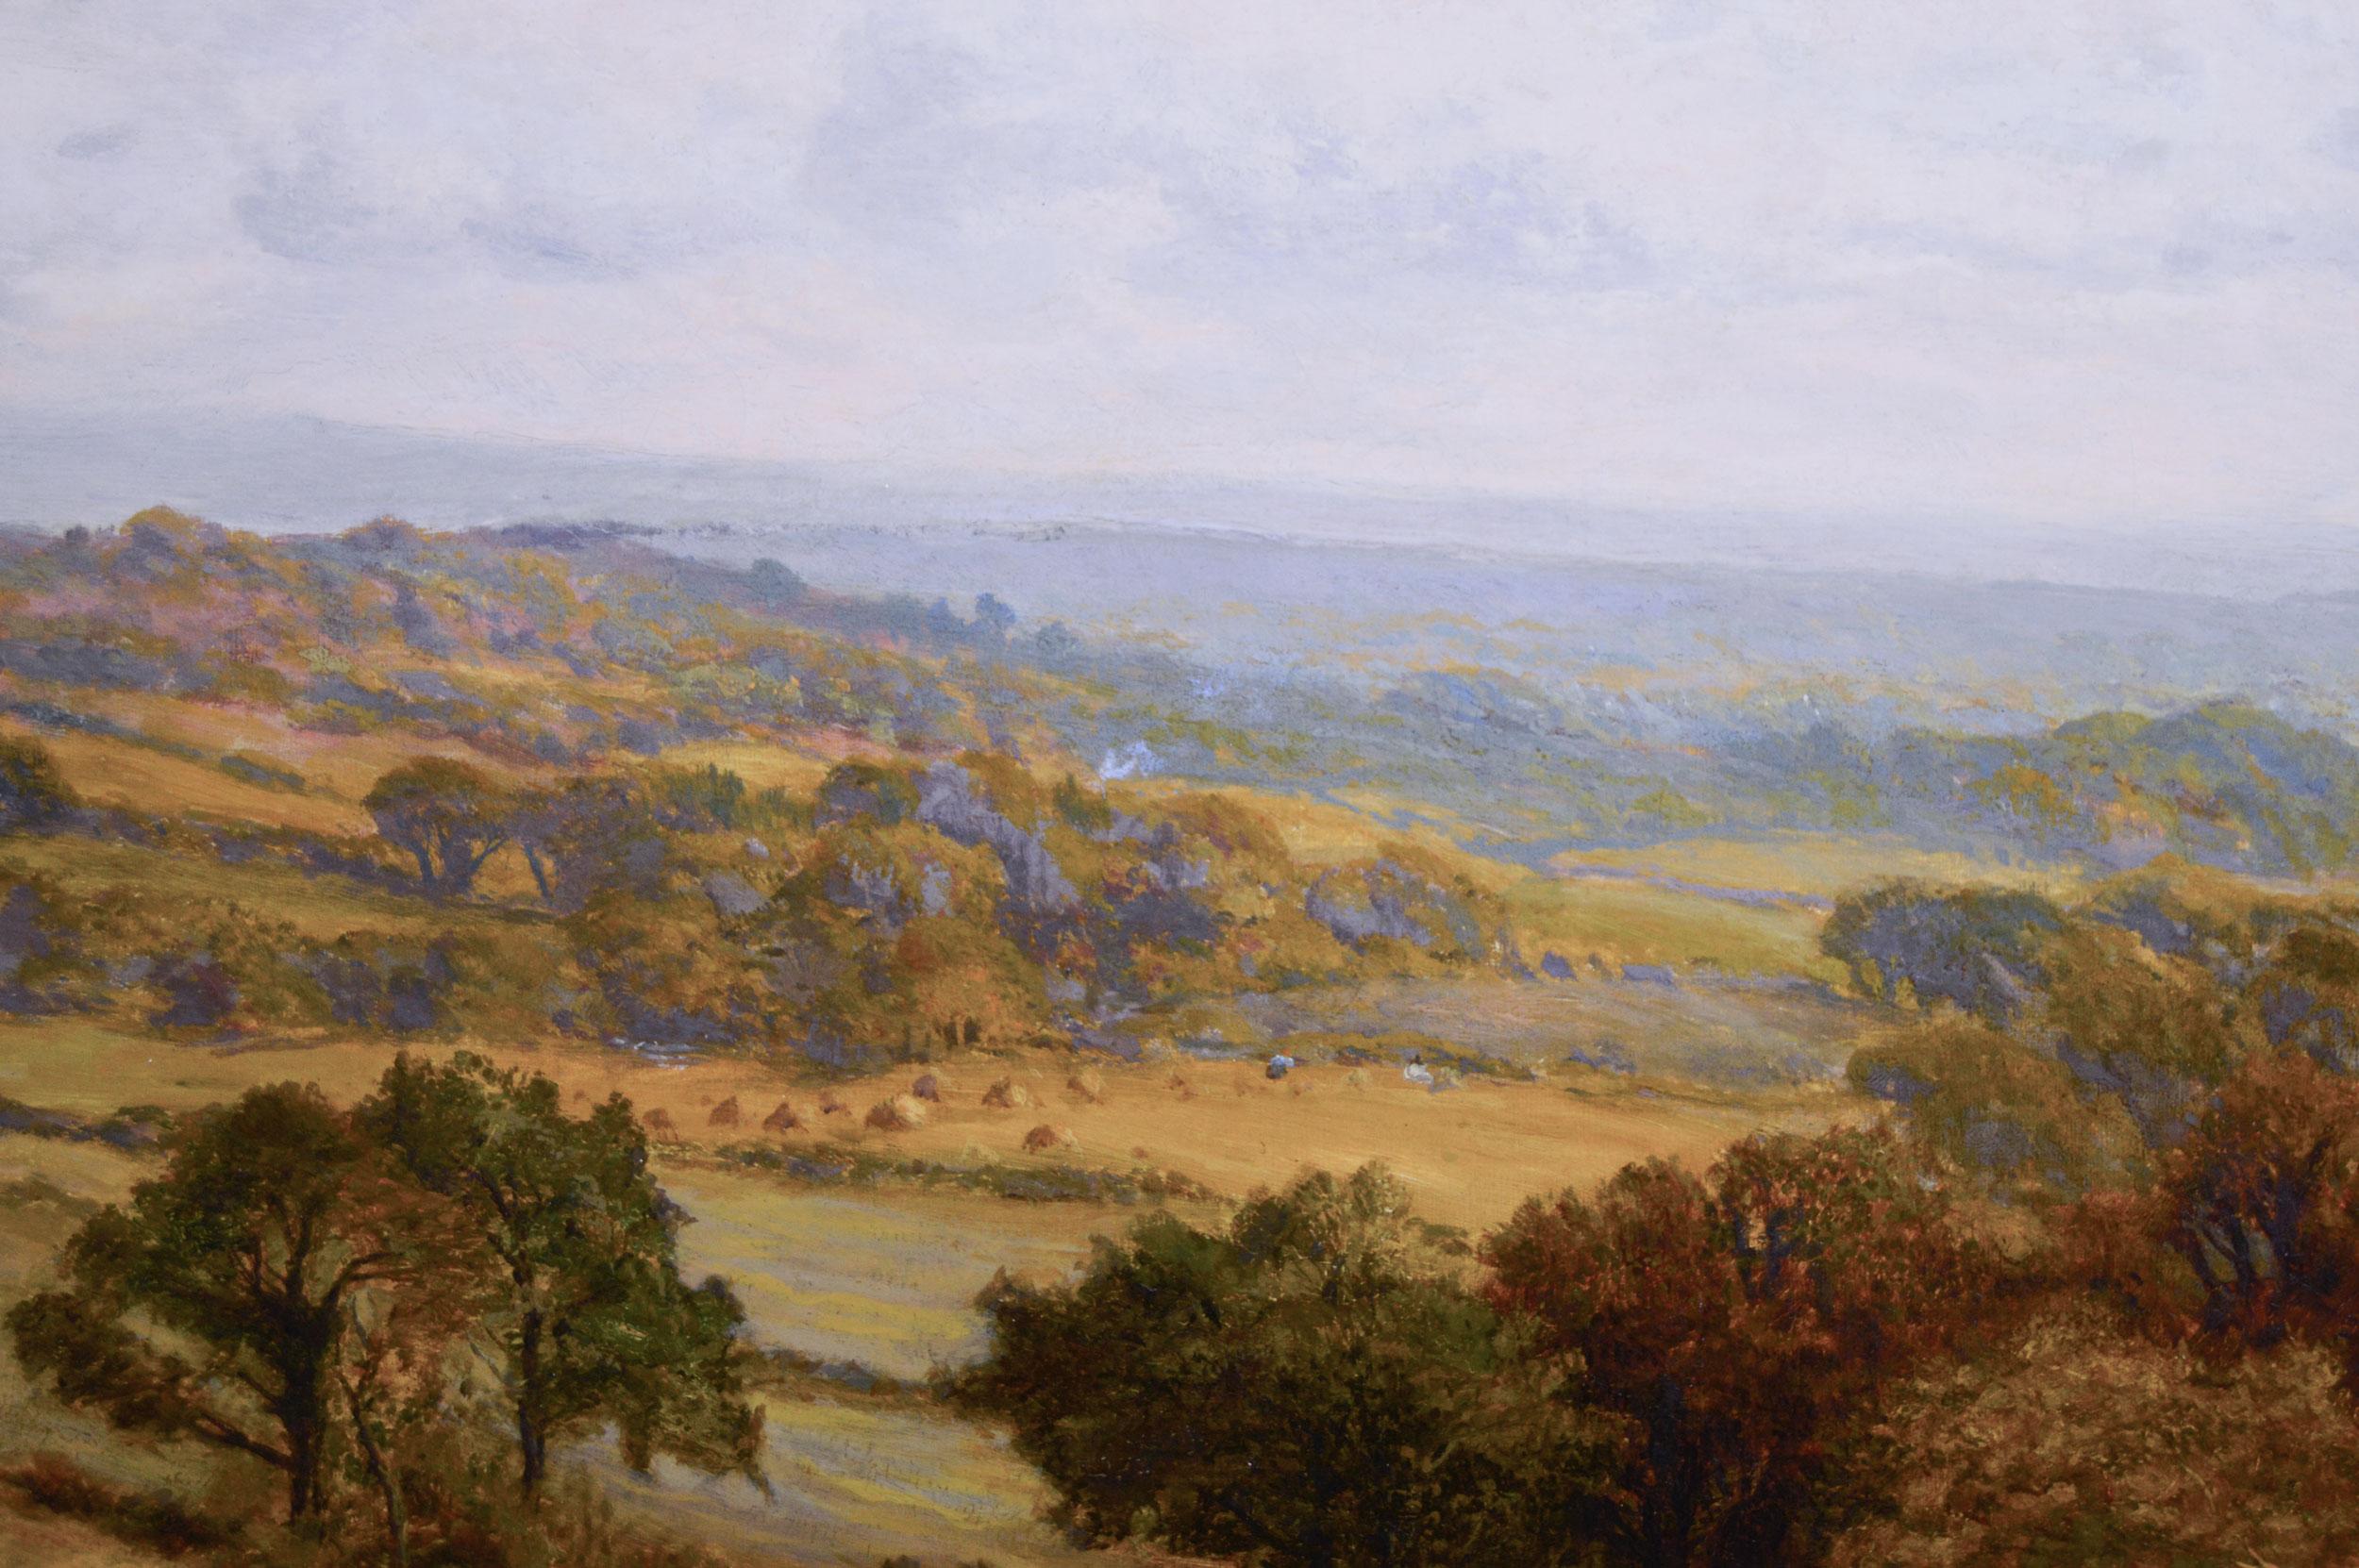 Alfred Augustus Glendening Snr
British, (1840-1921)
The Vale of Evesham
Oil on canvas, signed with monogram & dated (18)88
Image size: 29.25 inches x 49.5 inches 
Size including frame: 38.5 inches x 58.75 inches

This superb exhibition sized